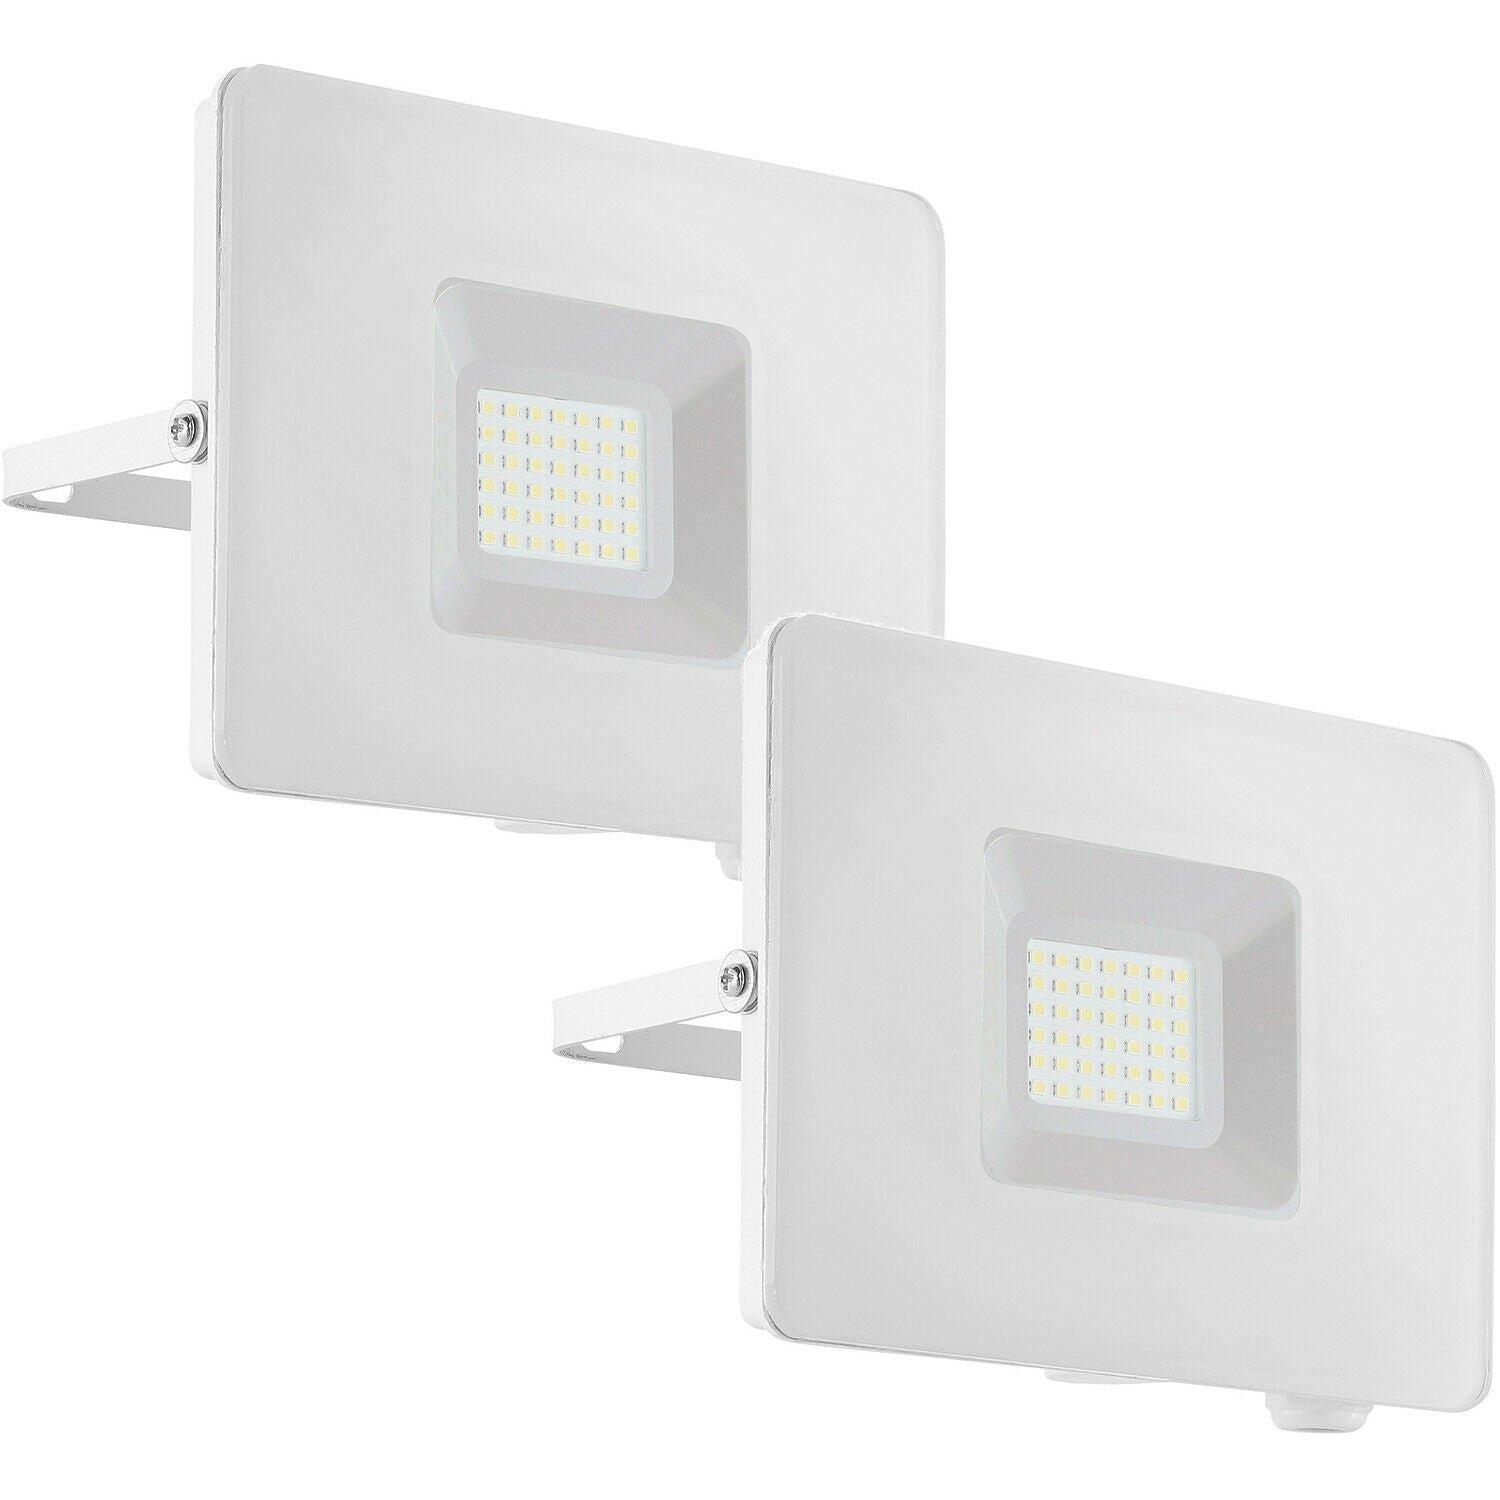 2 PACK IP65 Outdoor Wall Flood Light White Adjustable 30W LED Porch Lamp